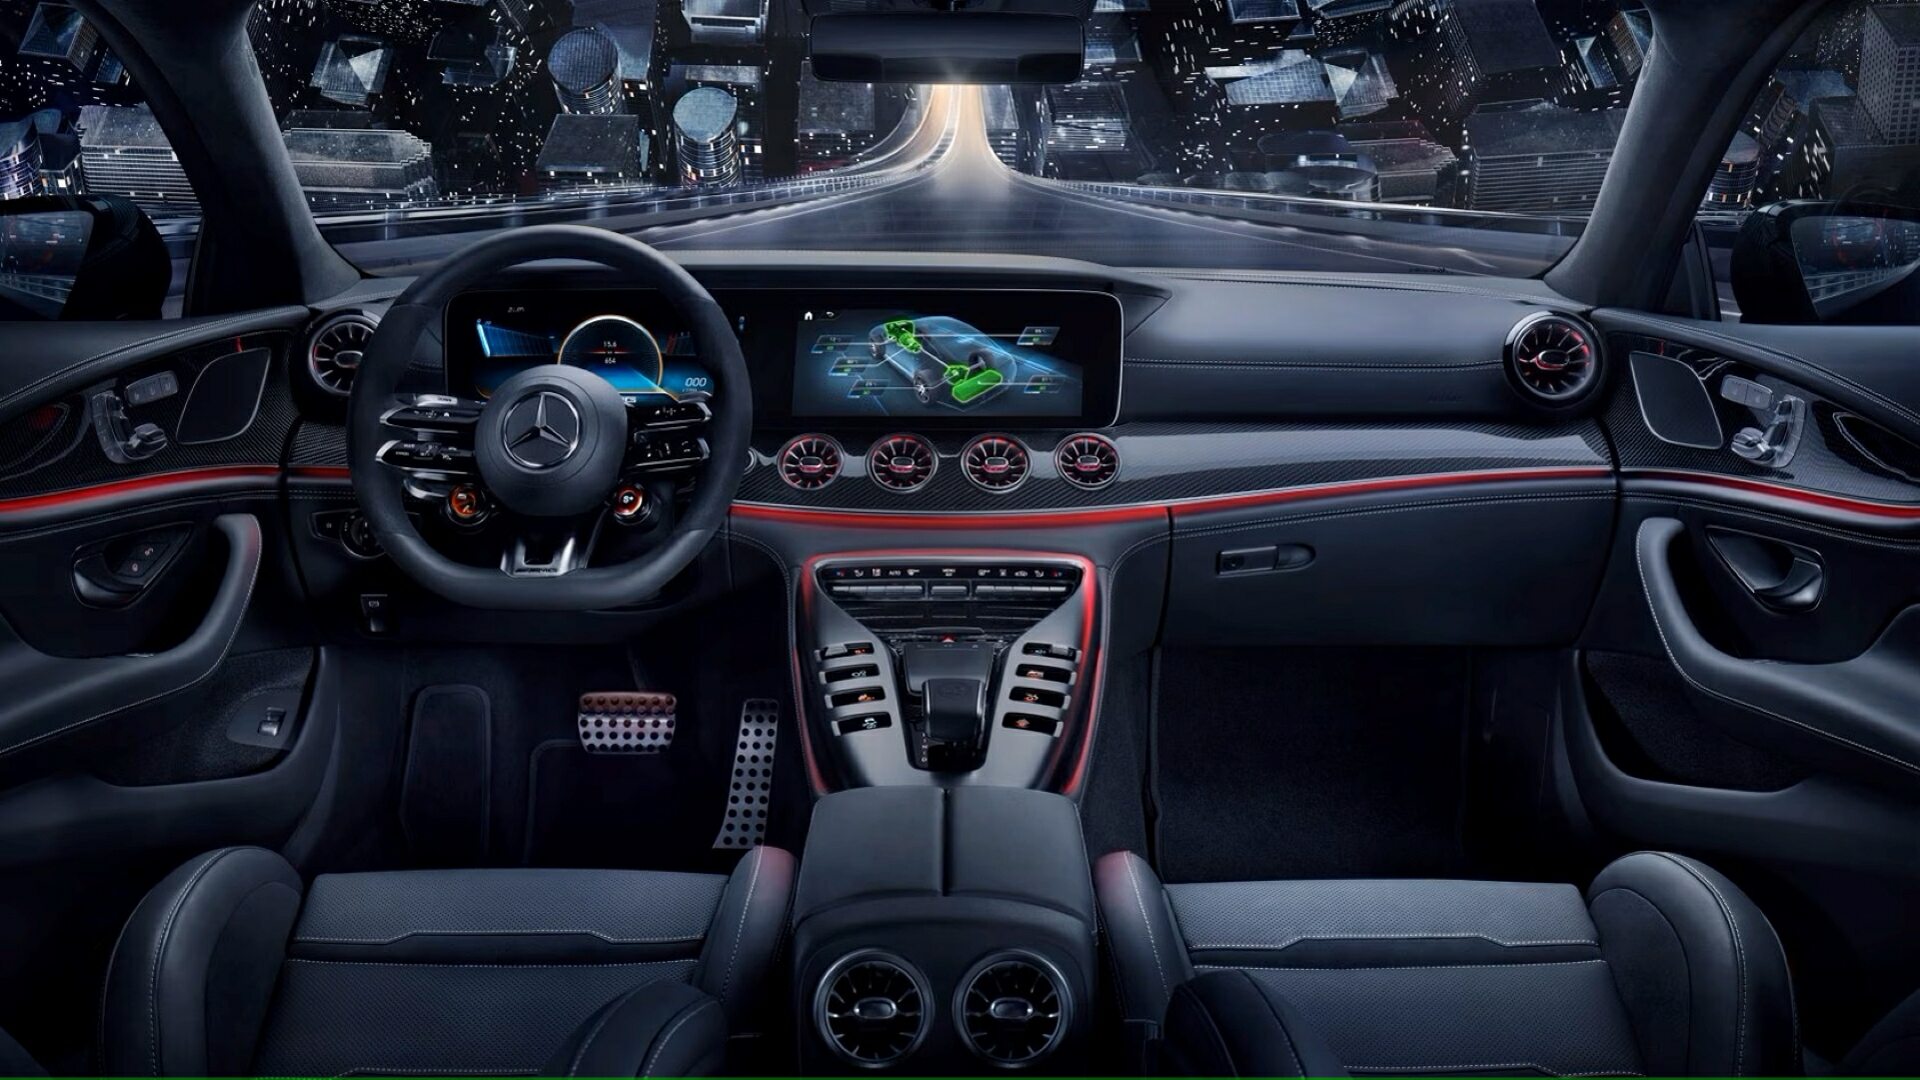 The Interior Of A Mercedes-Benz AMG GT 4 Door Coupe